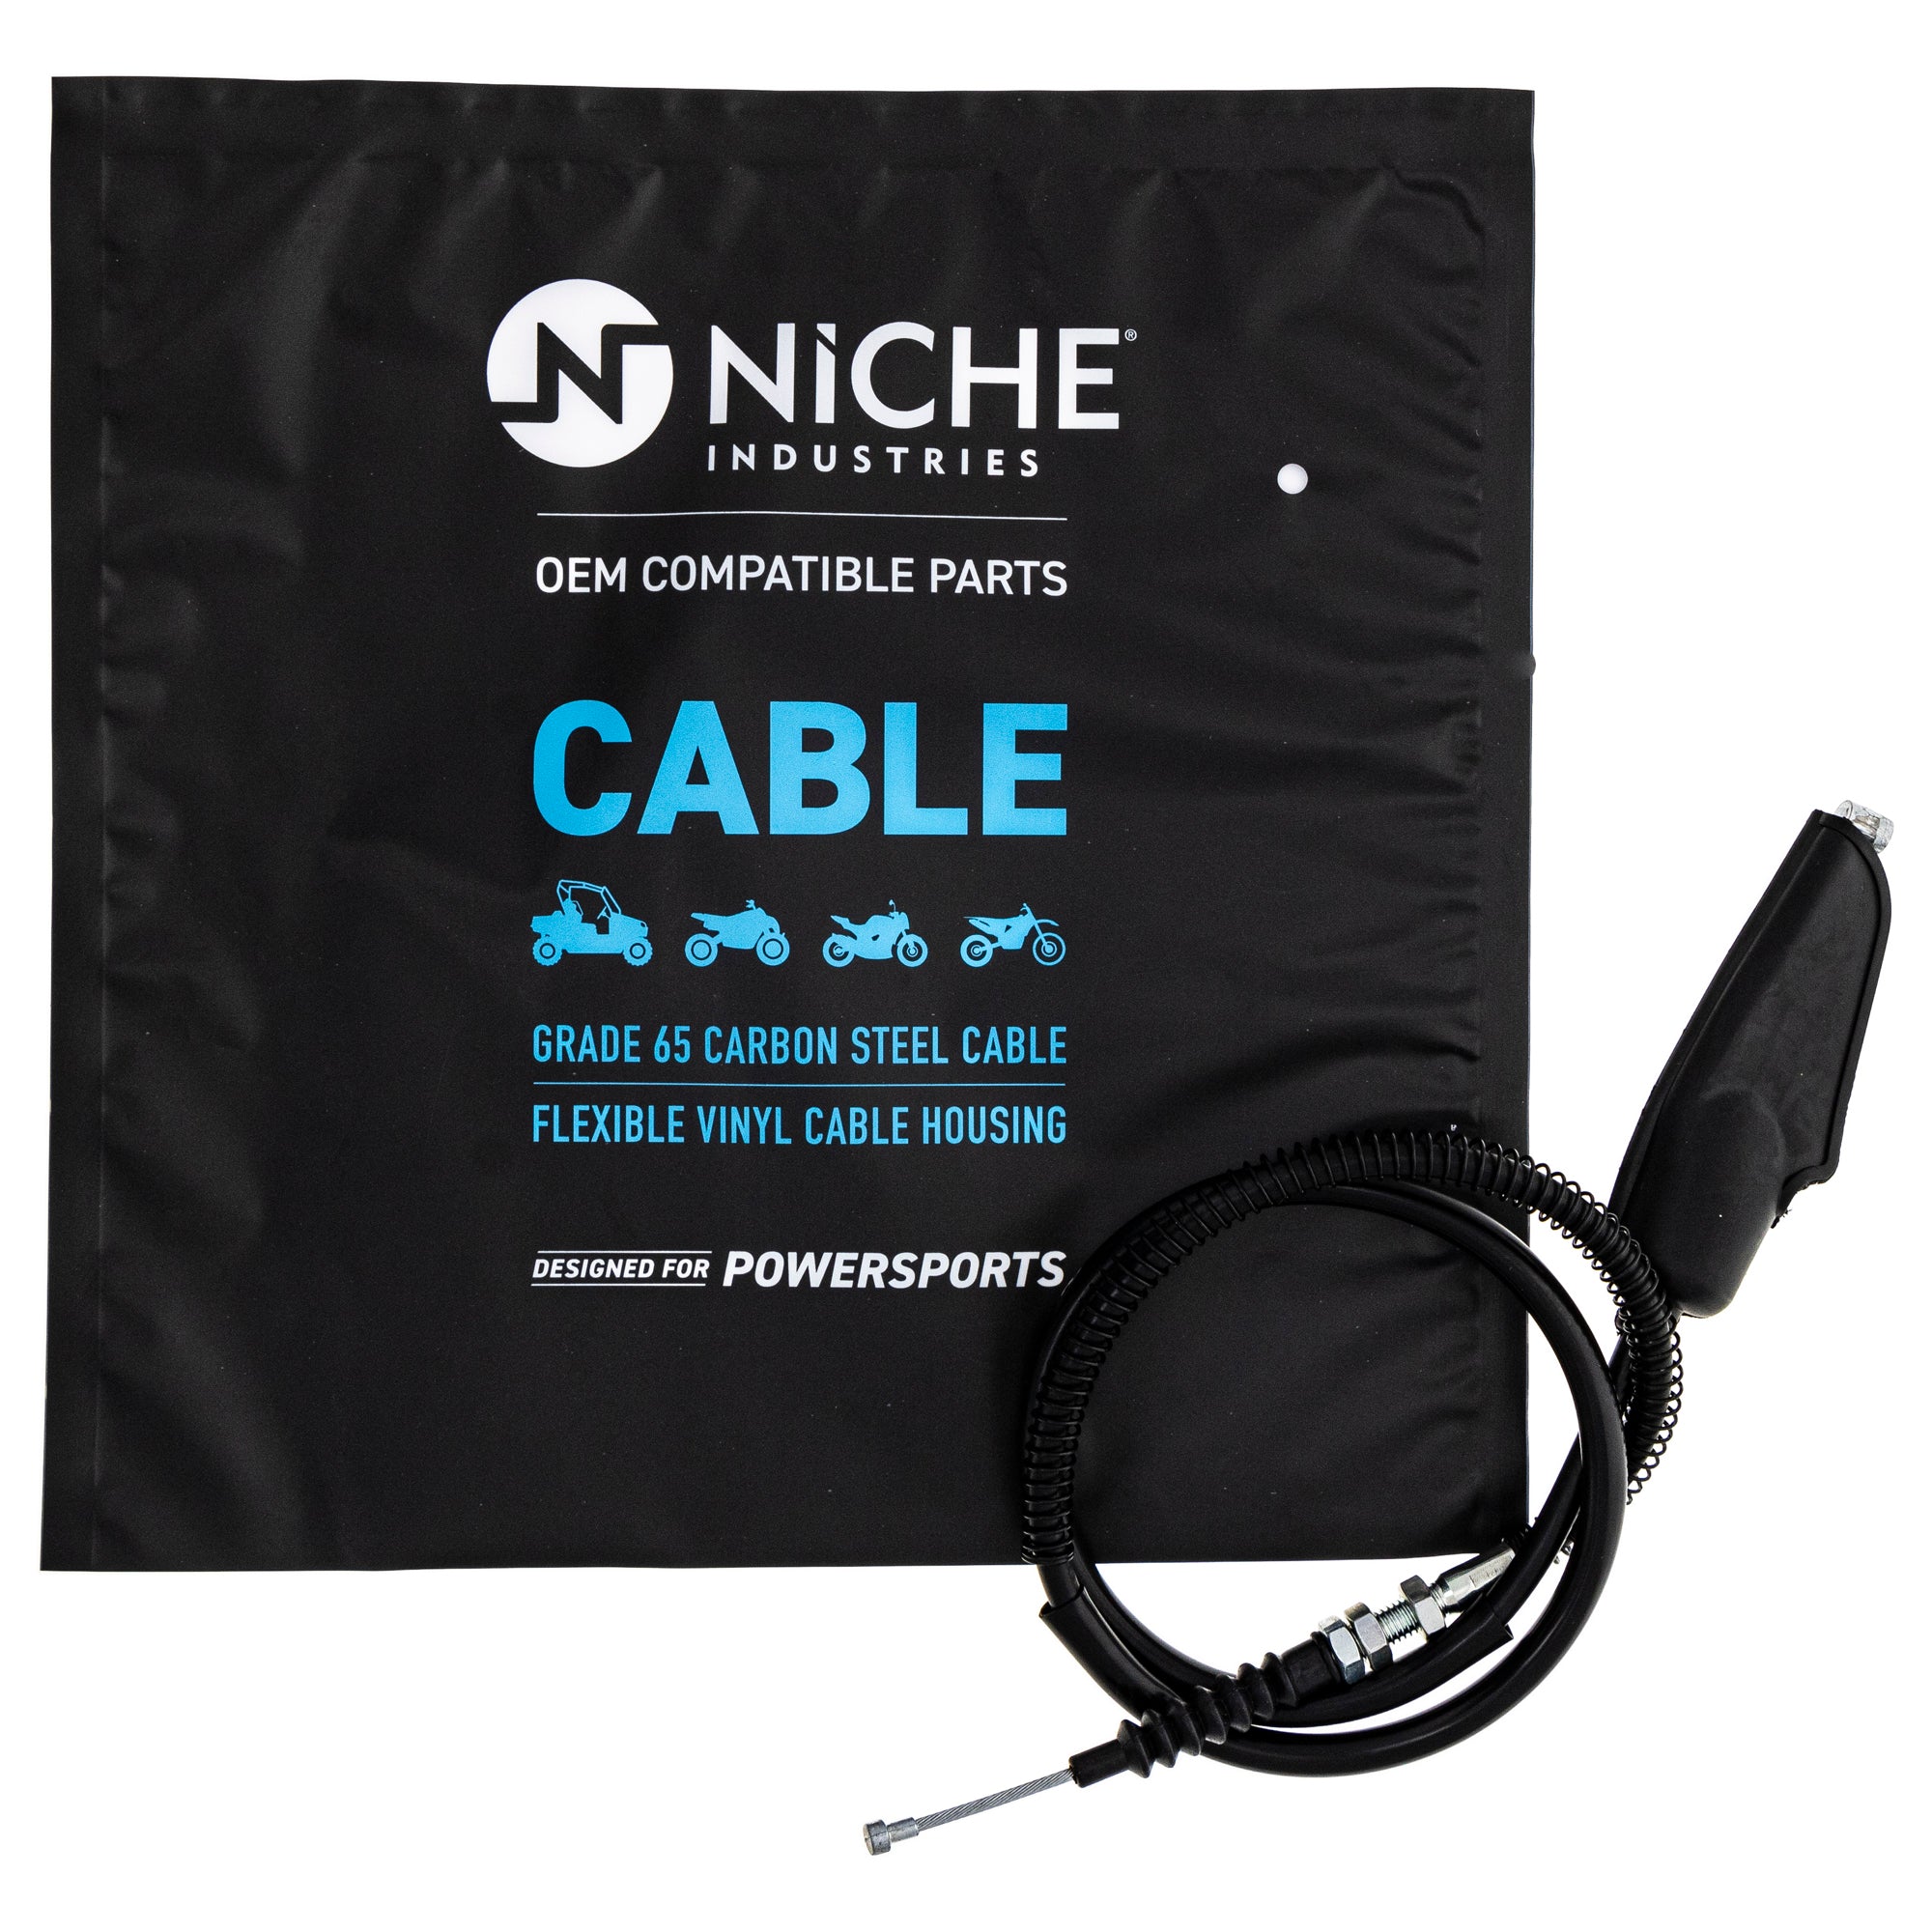 NICHE 519-CCB2732L Clutch Cable for zOTHER XT225 TW200 Big